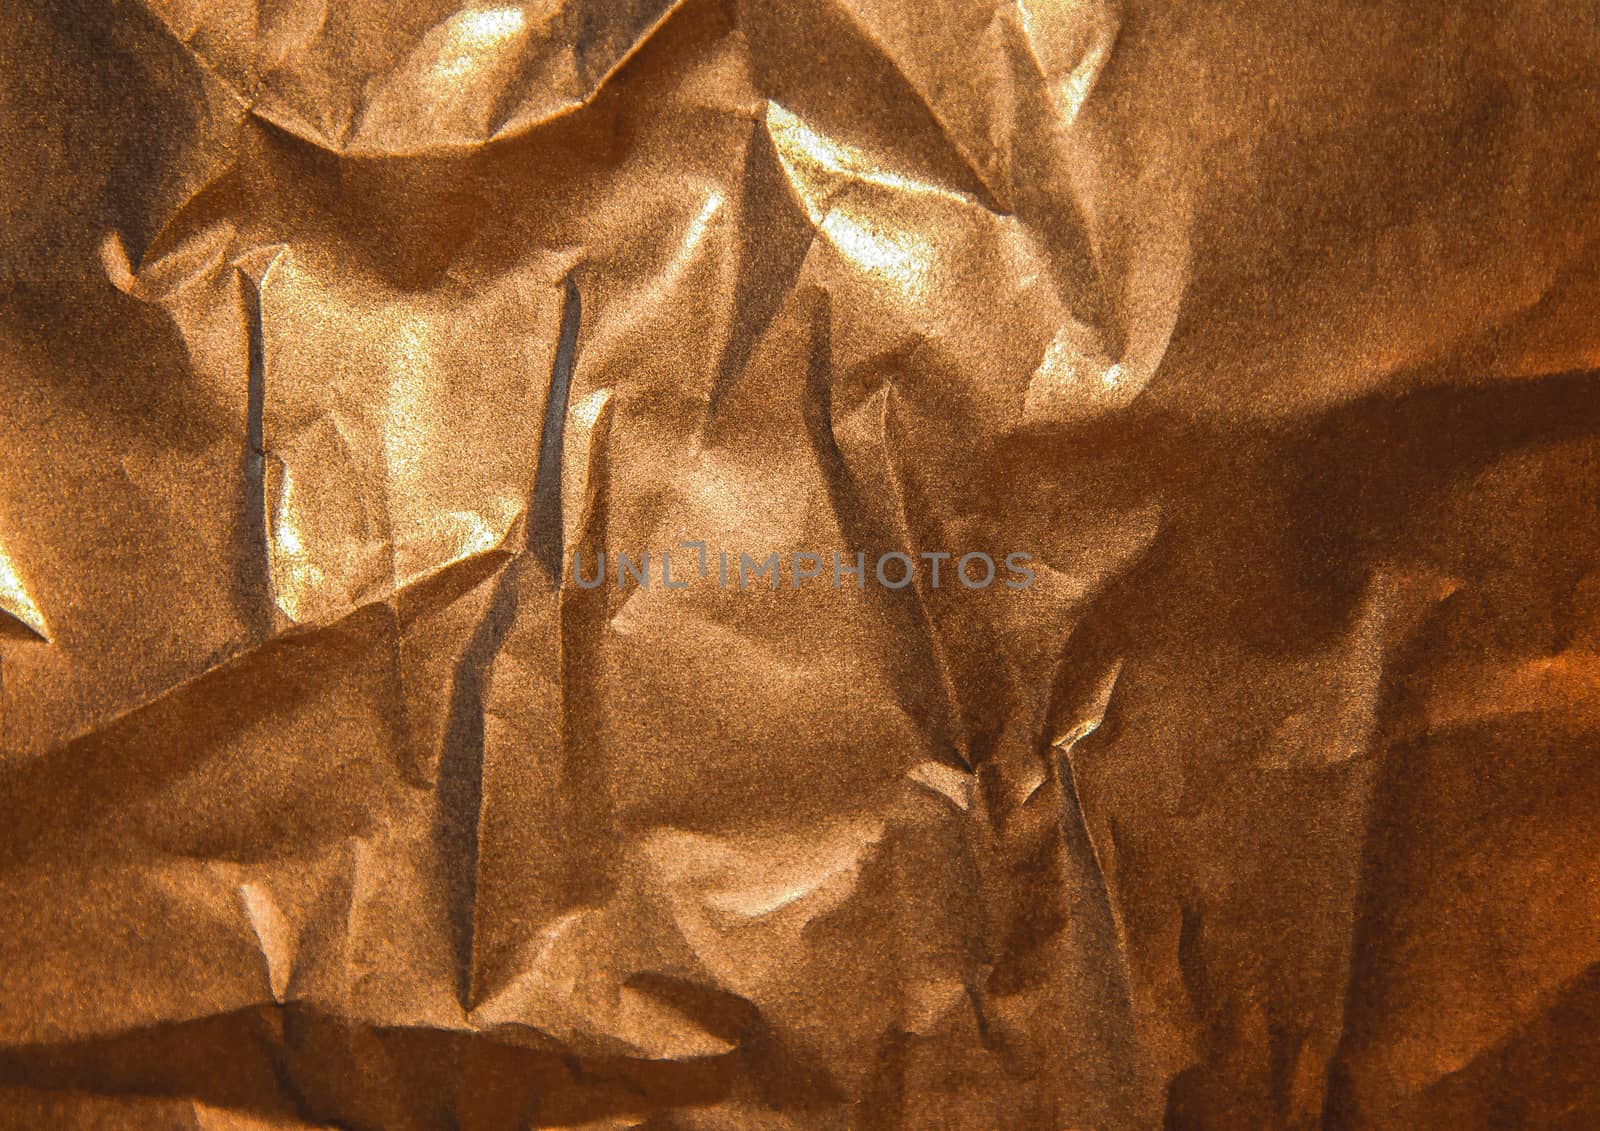 The bronze shinny abstract copper paper background